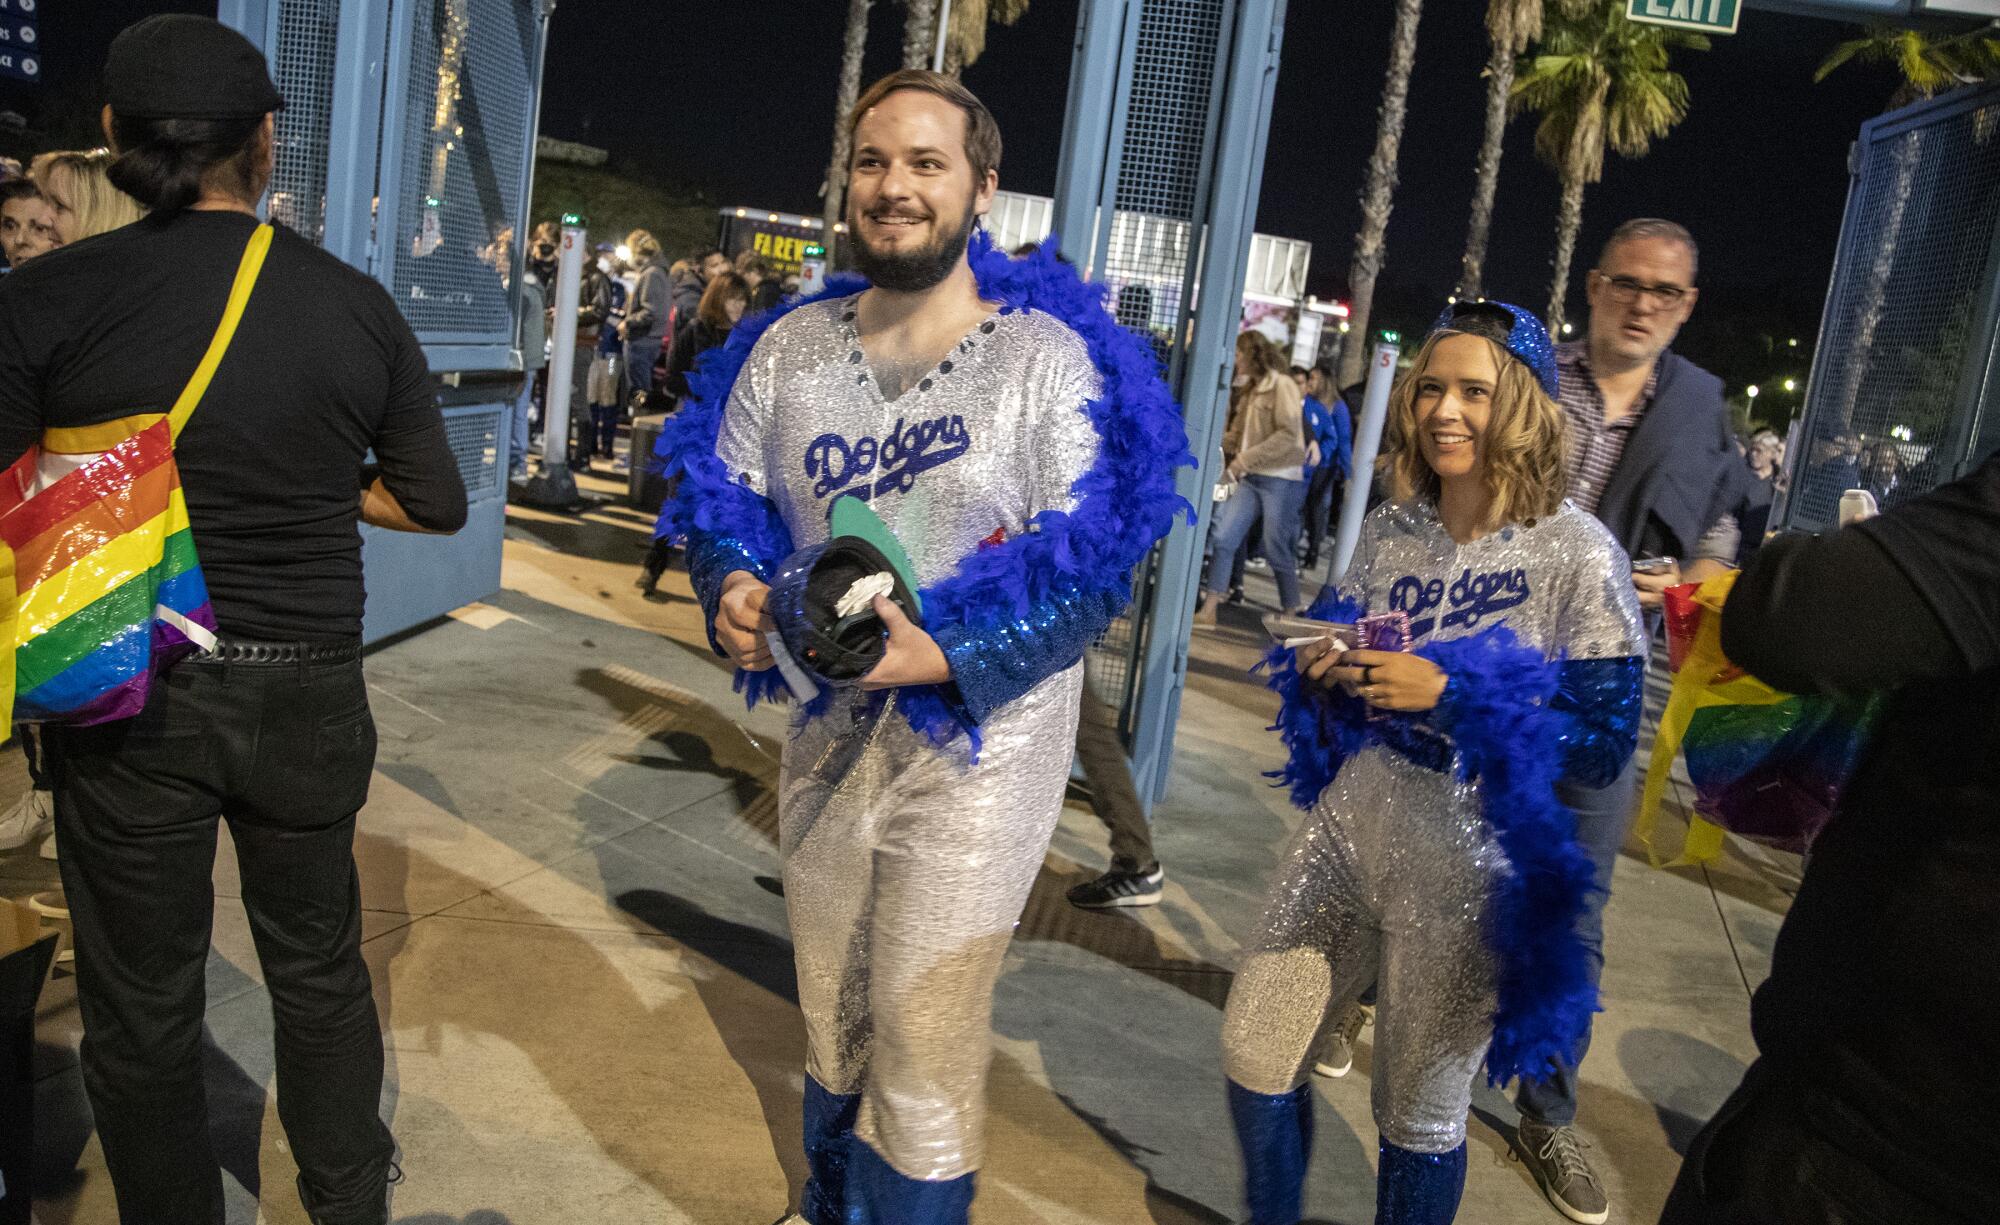 A man and a woman wear spangled Dodger uniforms and matching blue feather boas.